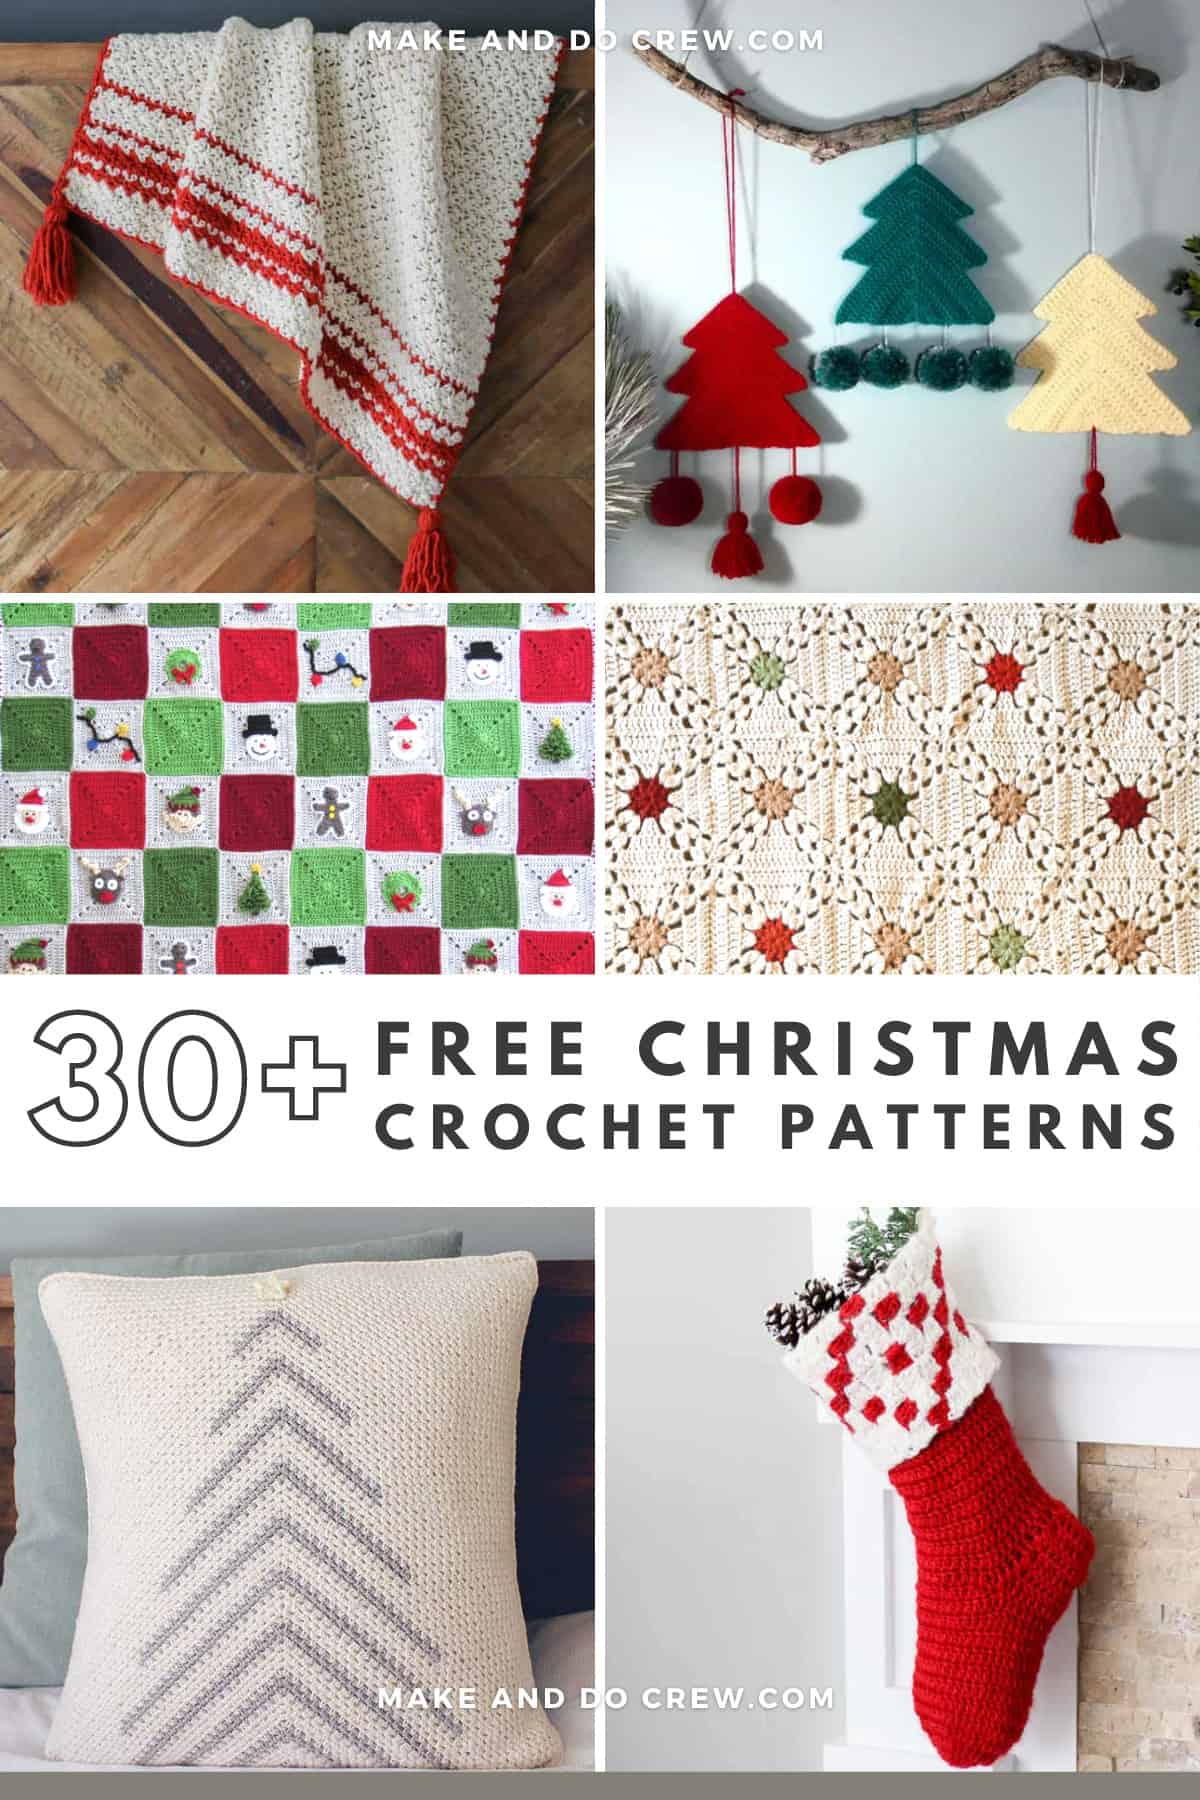 A grid of six modern Christmas crochet projects. There is a pillow, stocking, two granny square blankets, a tree wall hanging and striped blanket.